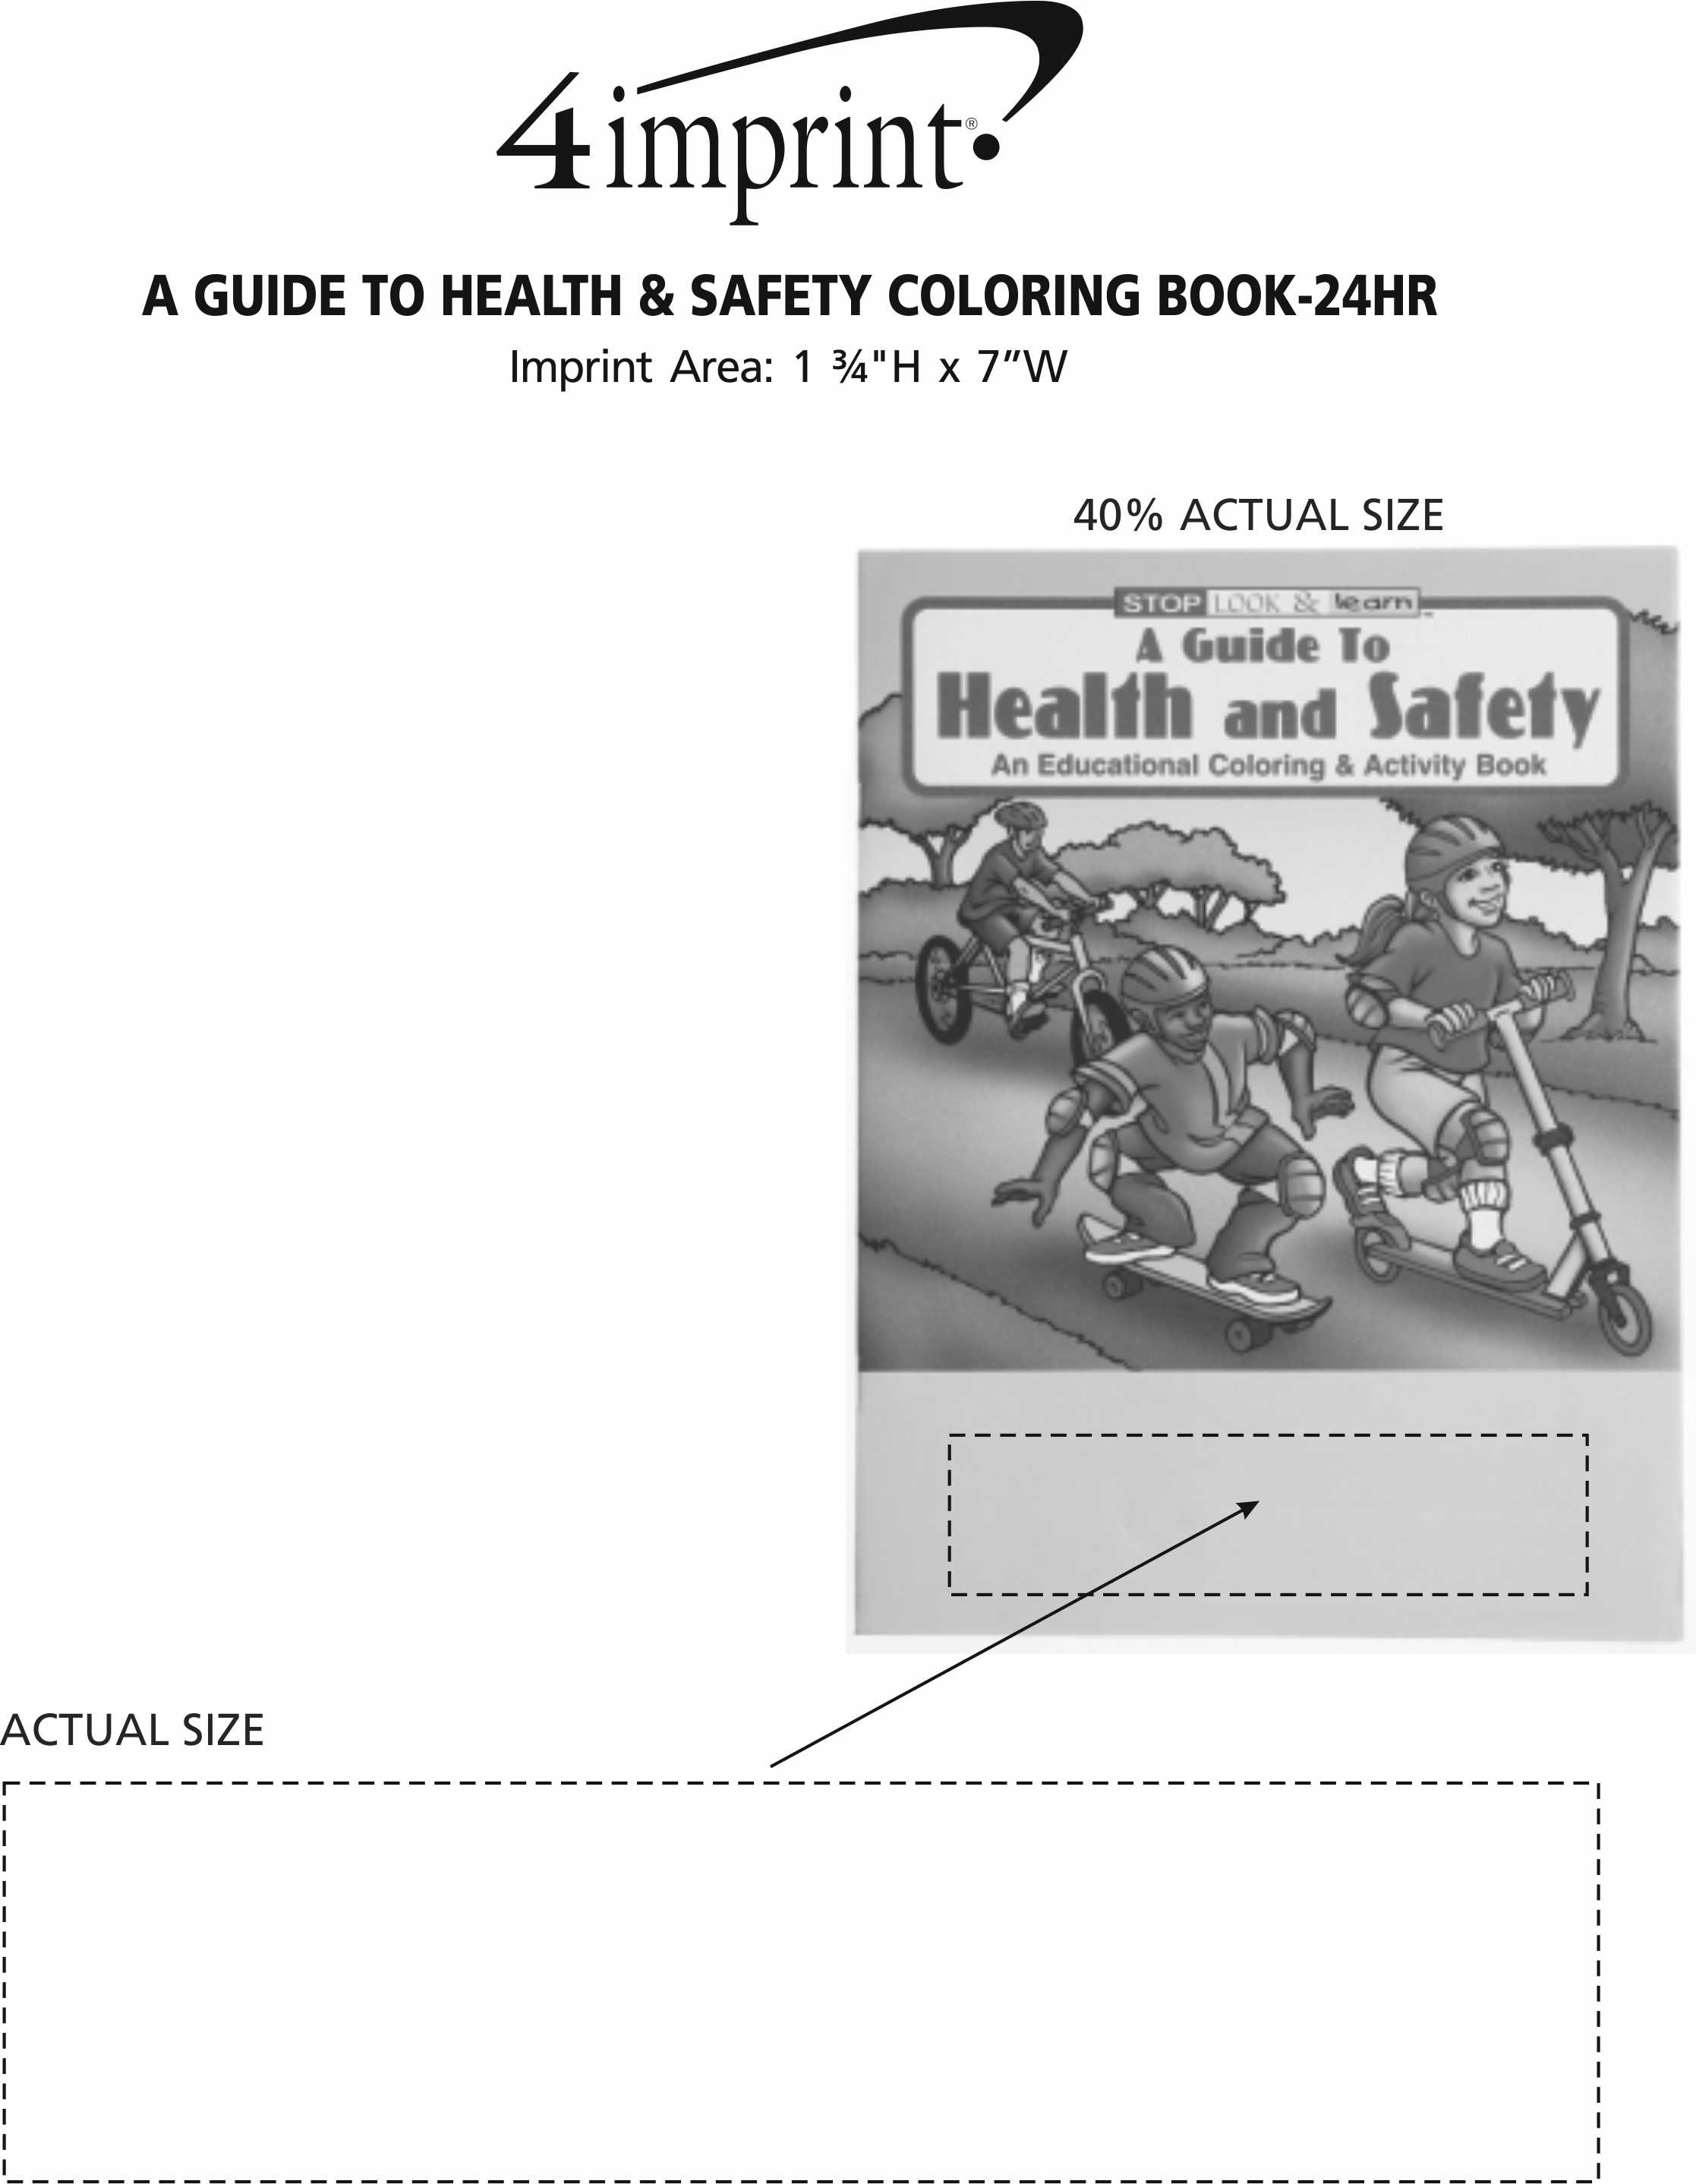 4imprint.com: A Guide To Health & Safety Coloring Book - 24 hr 1034-HS-24HR